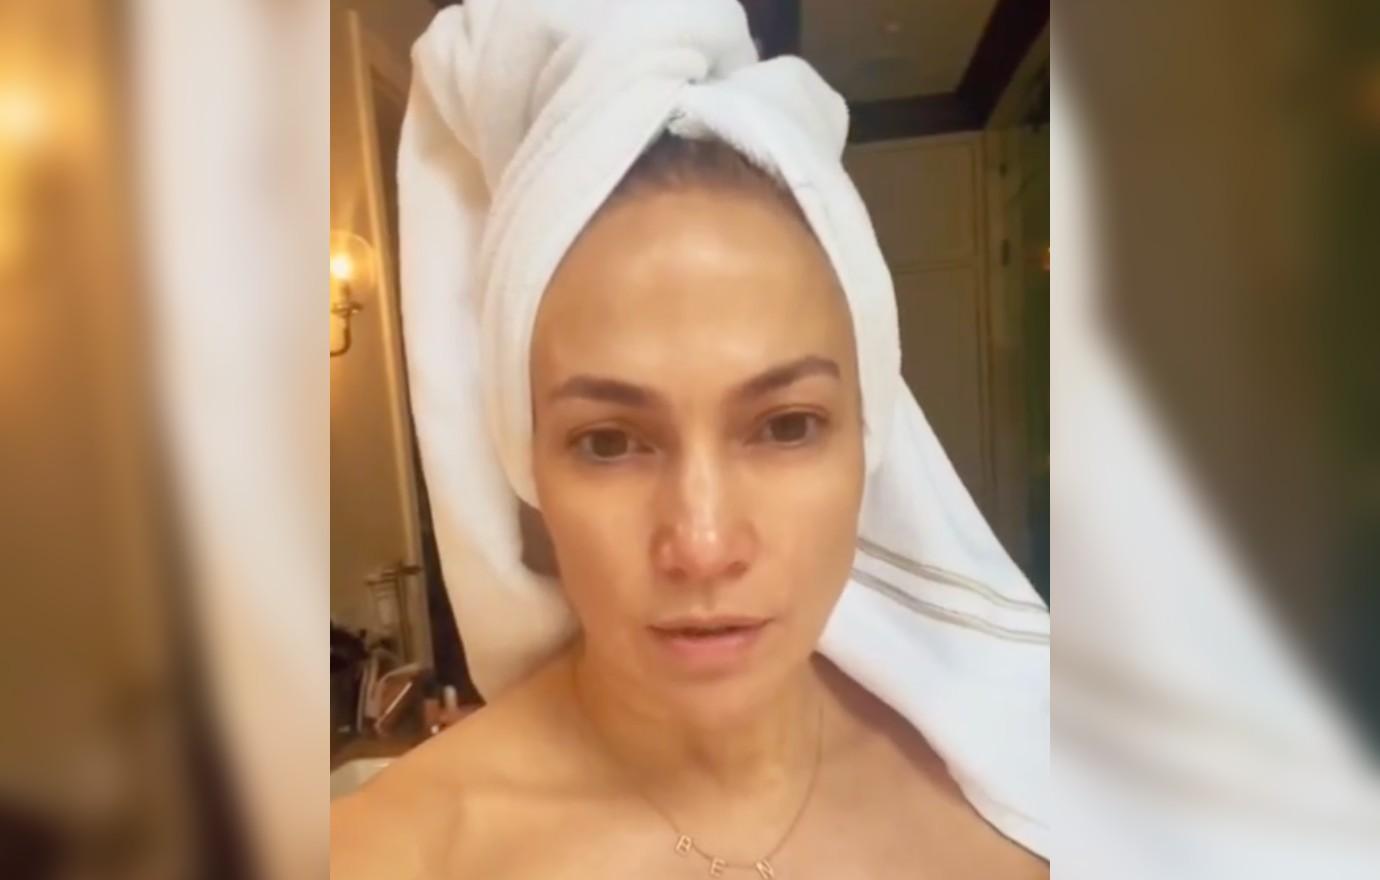 Jennifer Lopez goes make-up free in recent outing in Los Angeles: 'Just as  beautiful